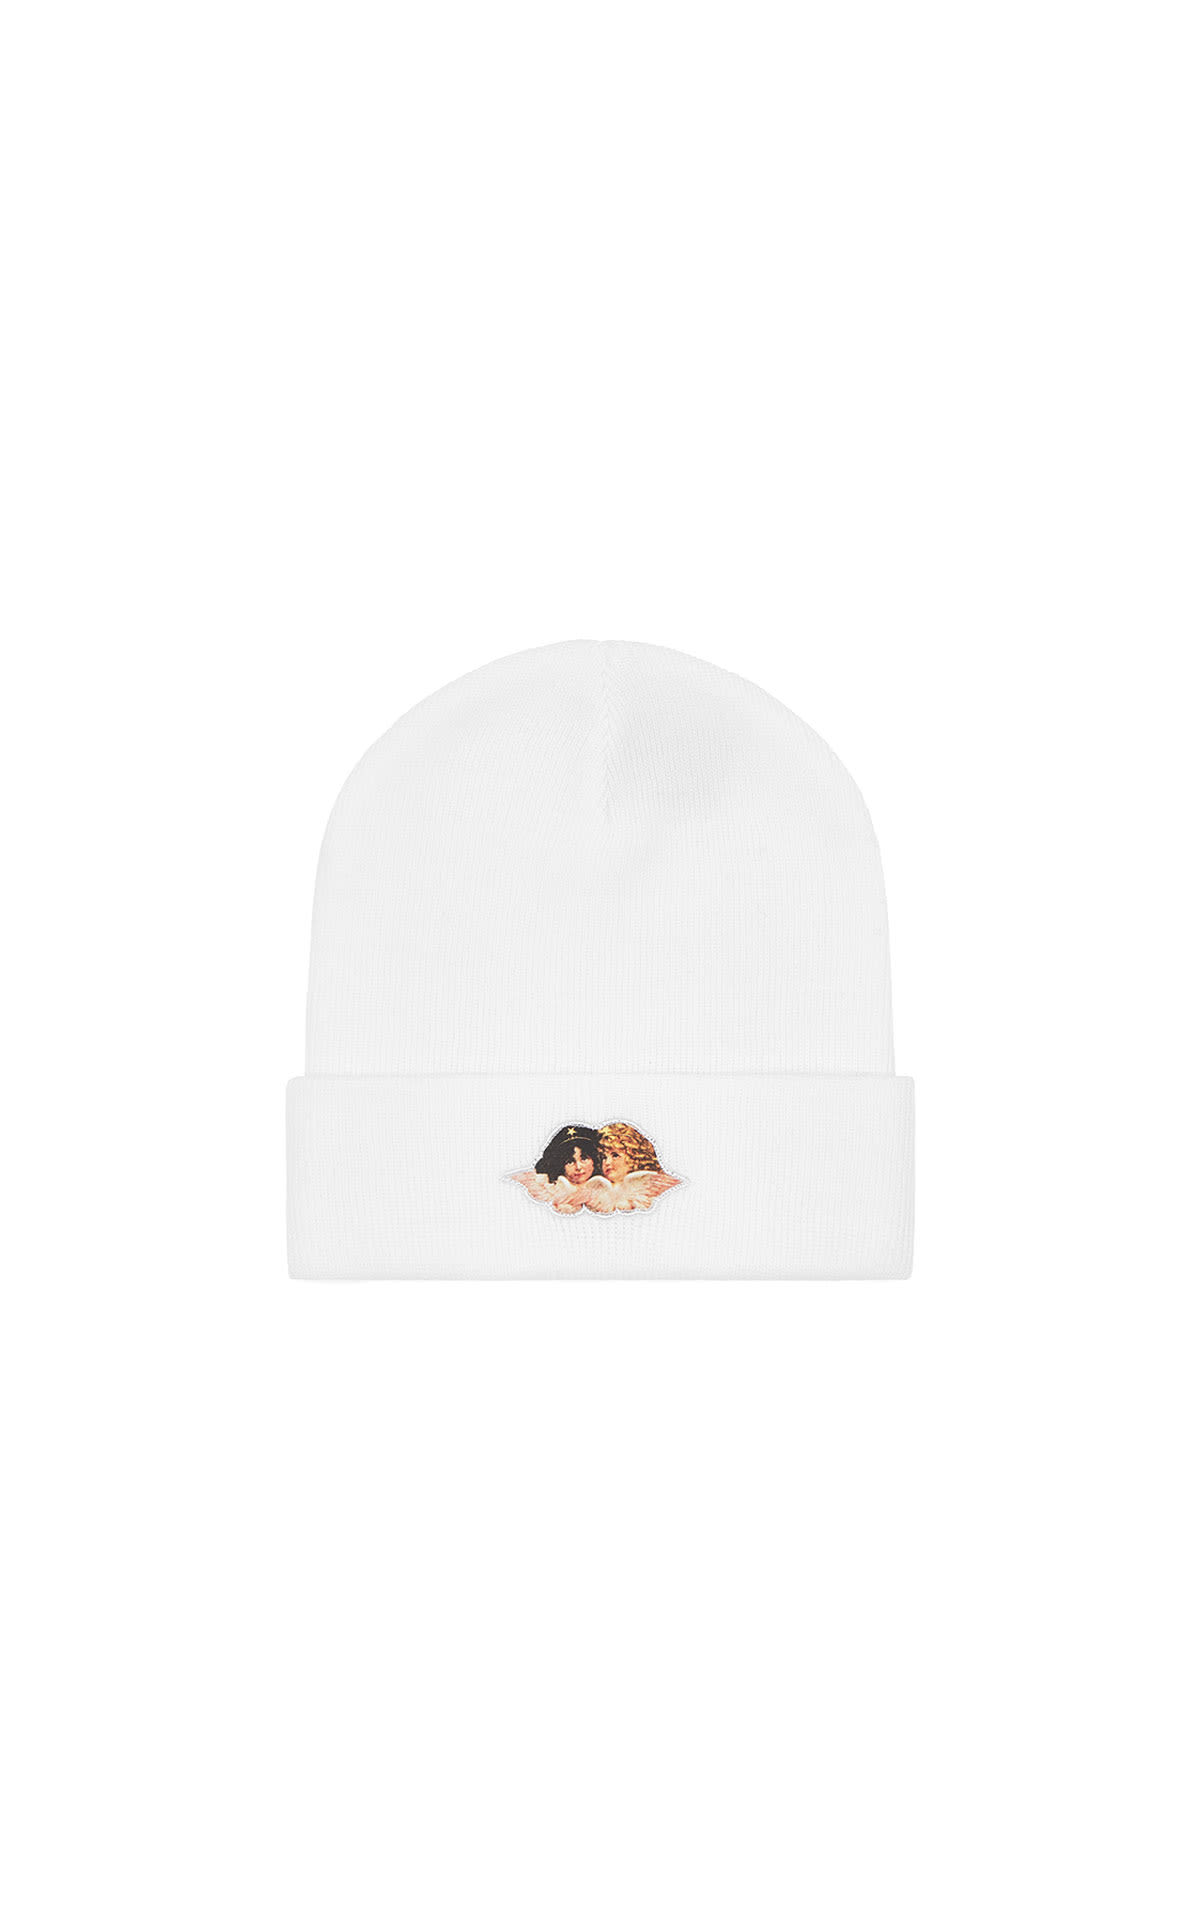 Fiorucci Angels patch beanie white from Bicester Village